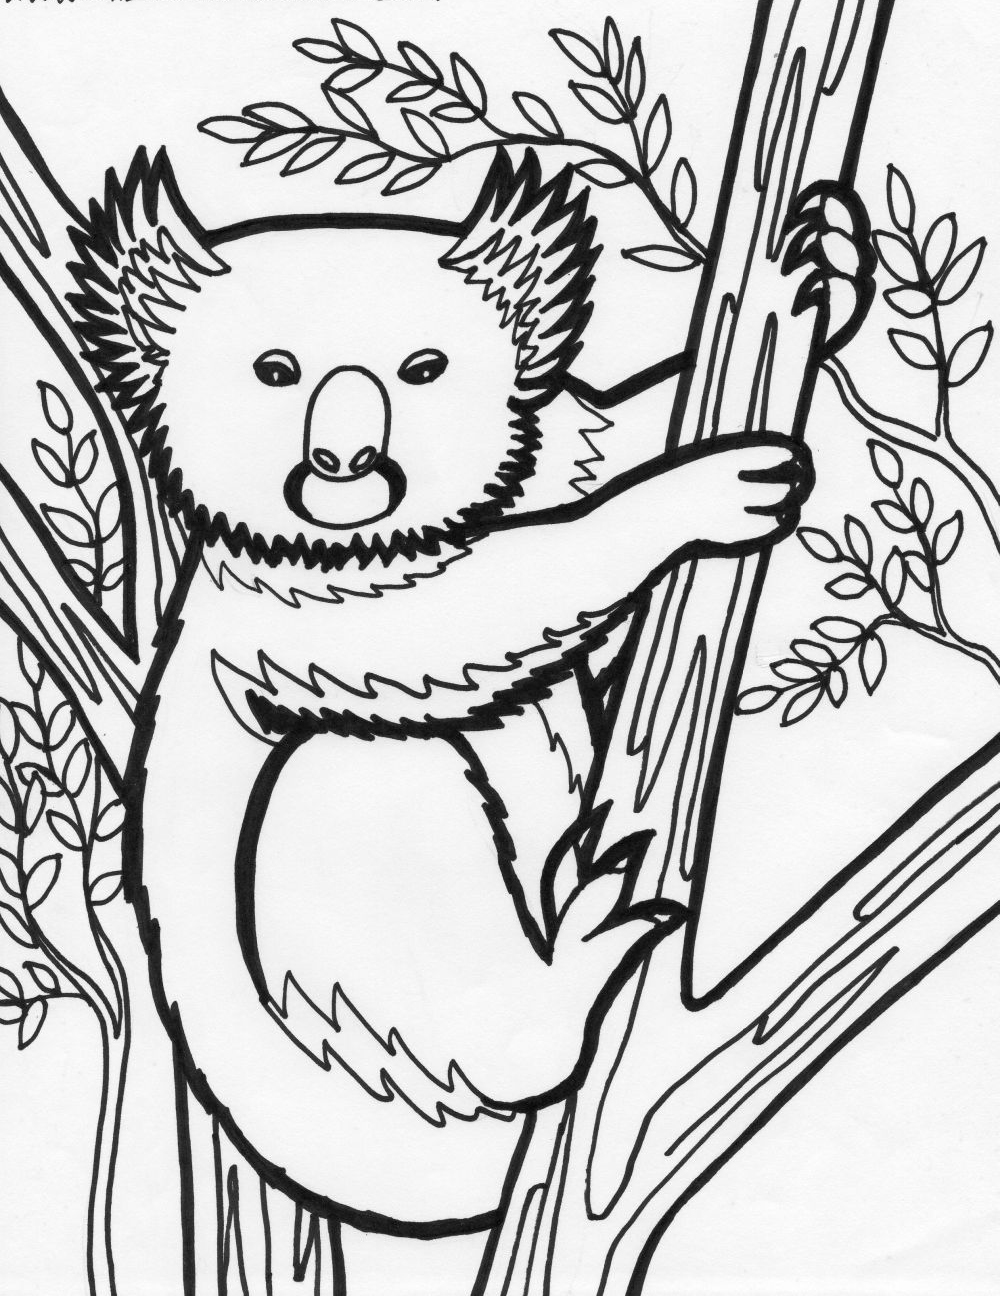 Download Free Coloring Pages: Animal Coloring Pages - Koala and ...